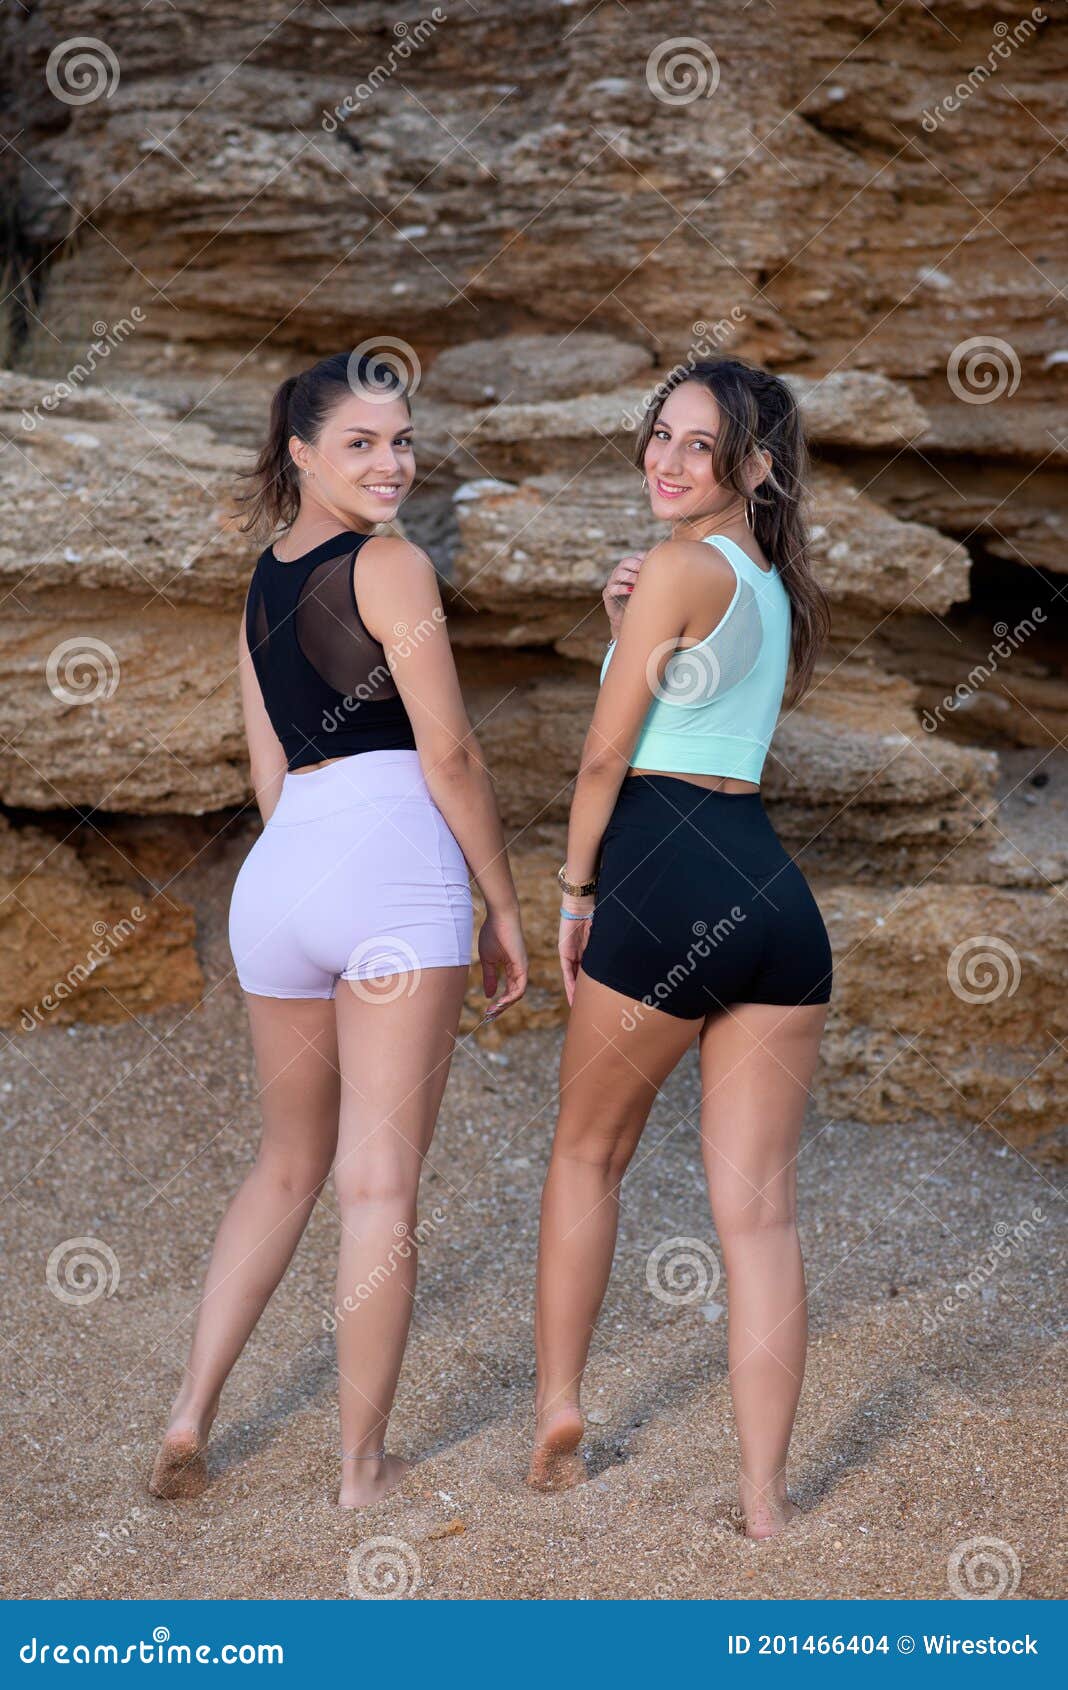 Young Sporty Girls Wearing Tight Workout Shorts and Crop Tops